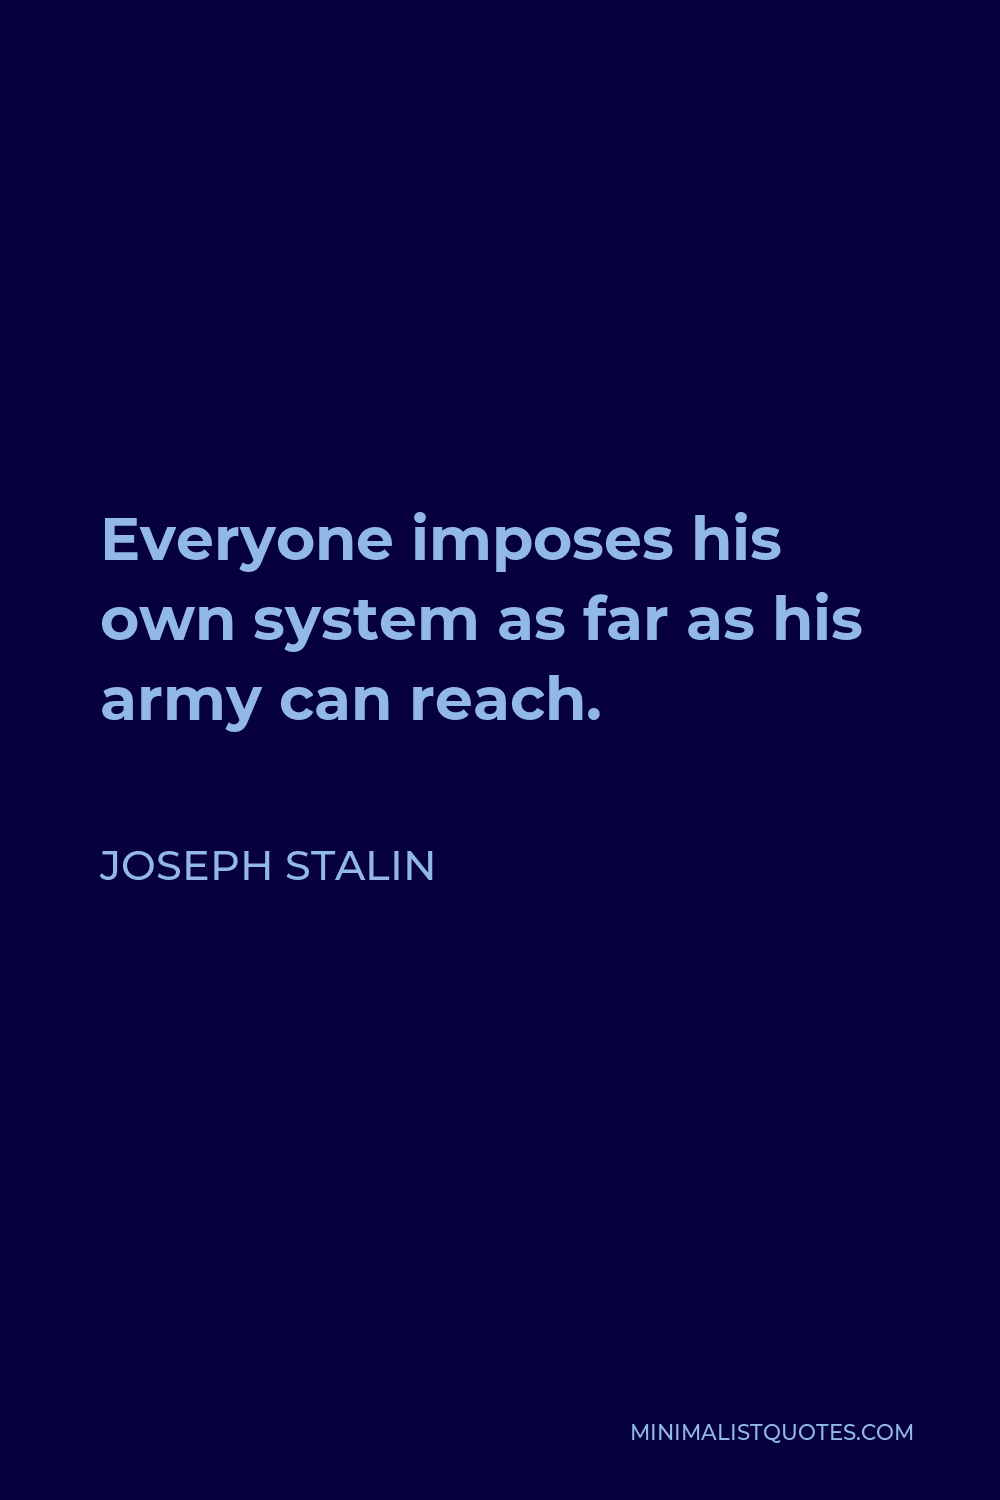 Joseph Stalin Quote - Everyone imposes his own system as far as his army can reach.